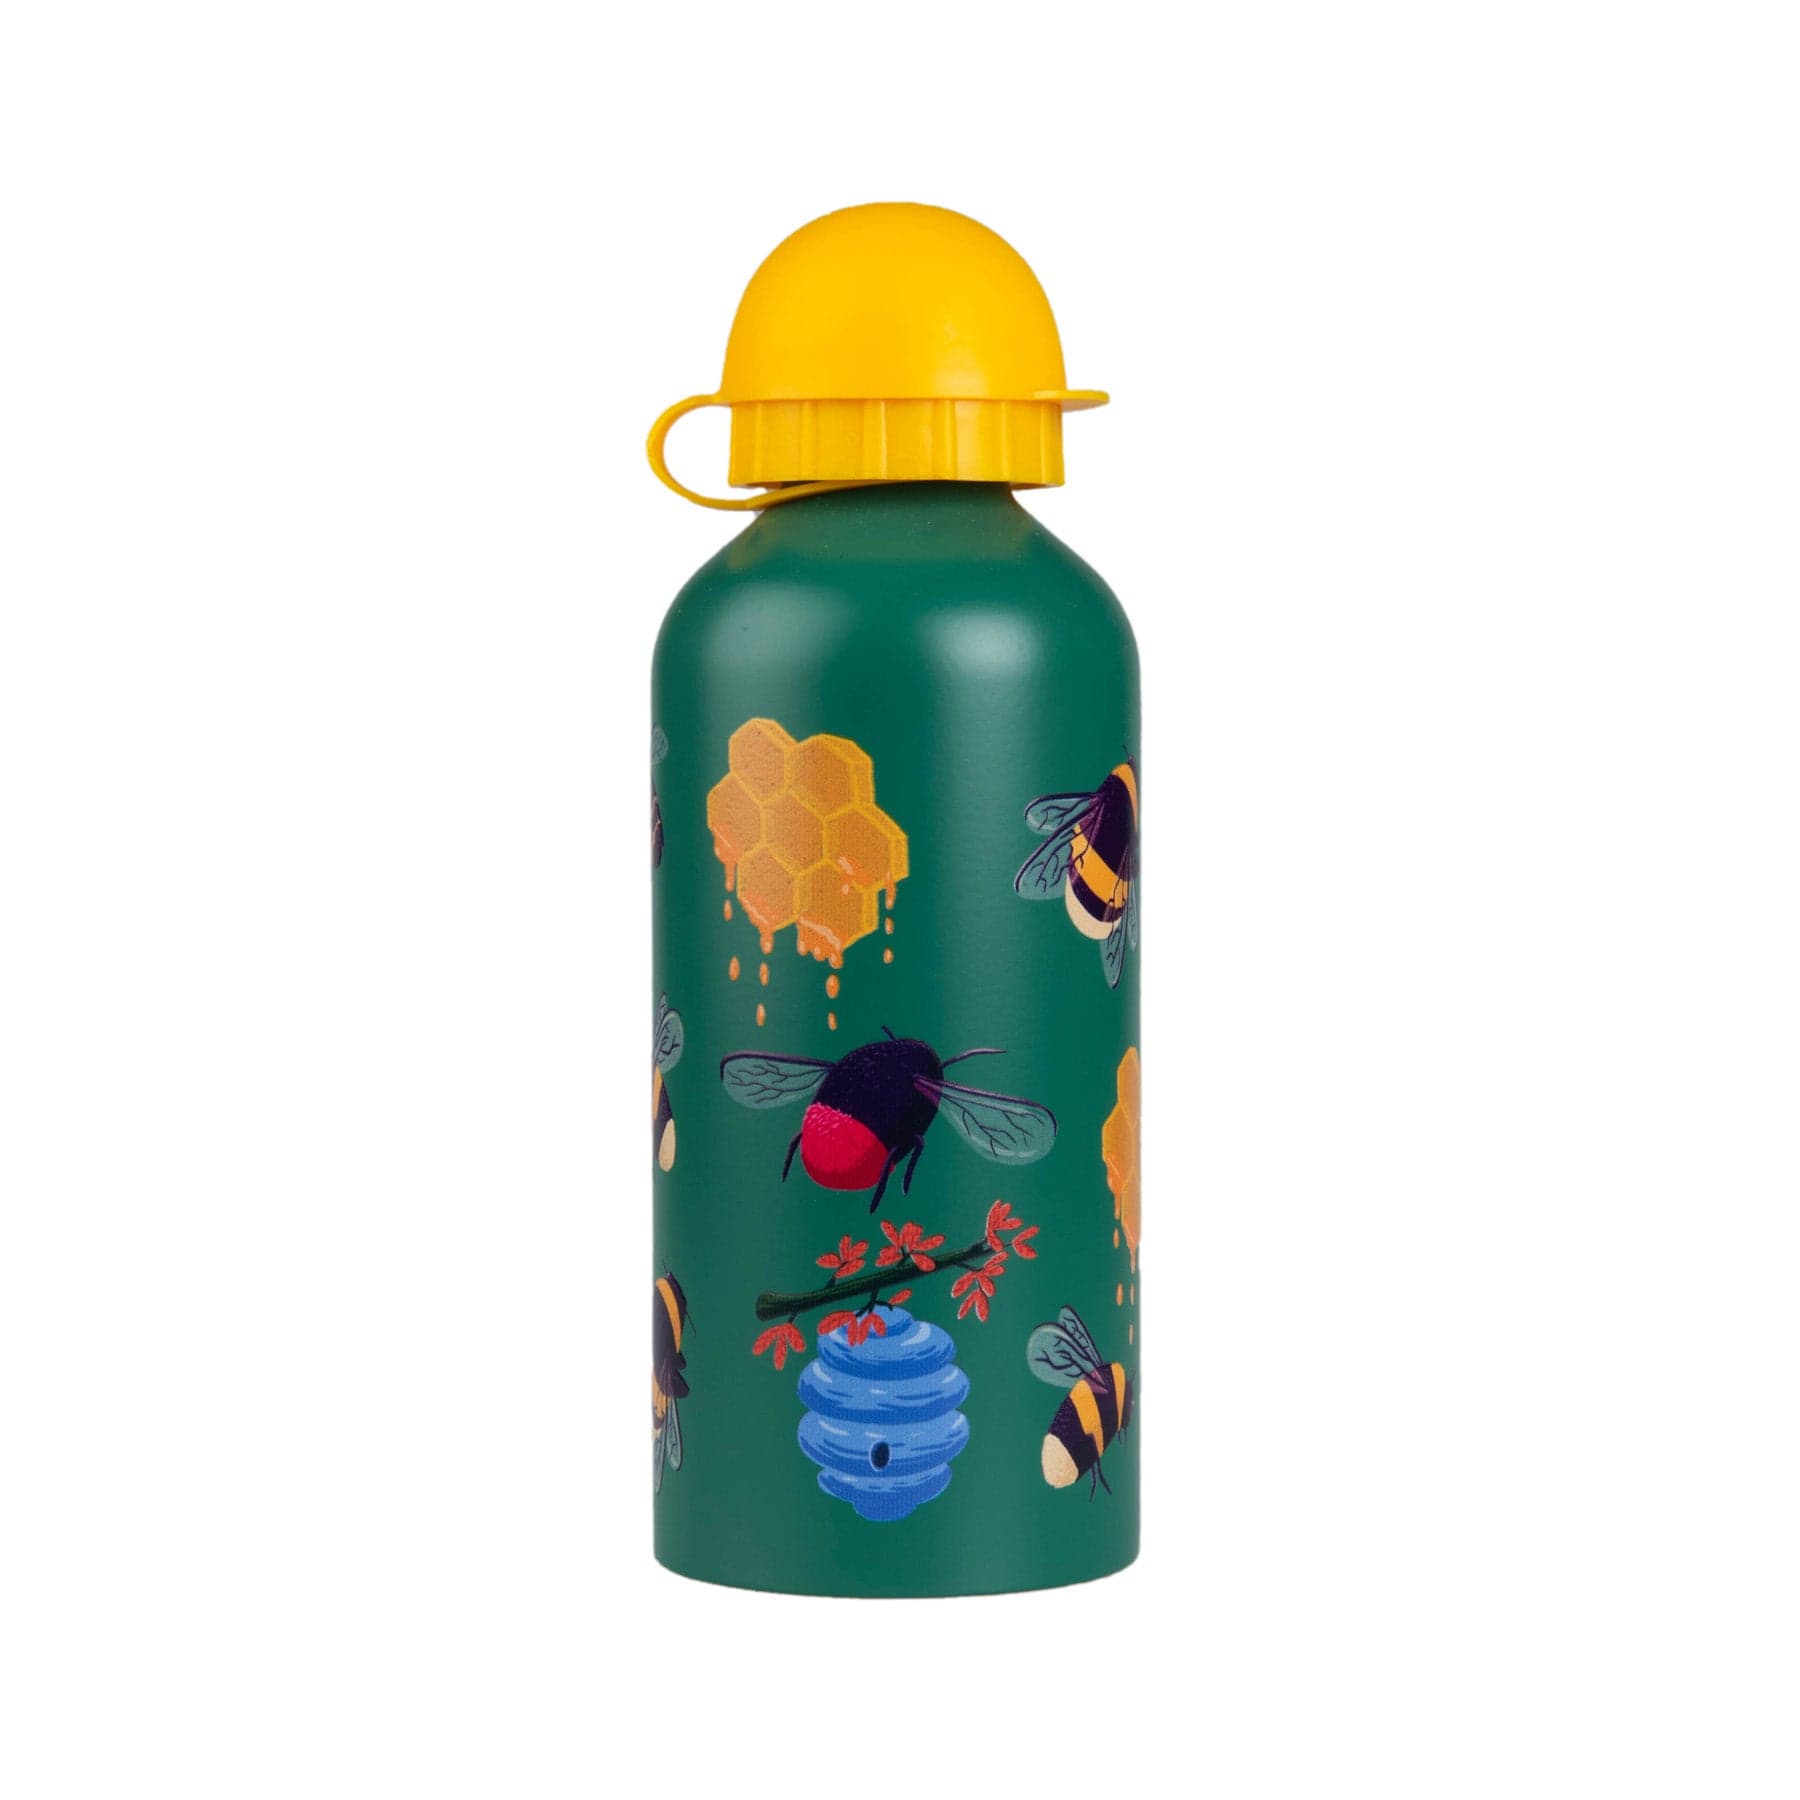 Green reusable water bottle with yellow lid and bee-themed illustrations including honeycombs and flowers on white background.